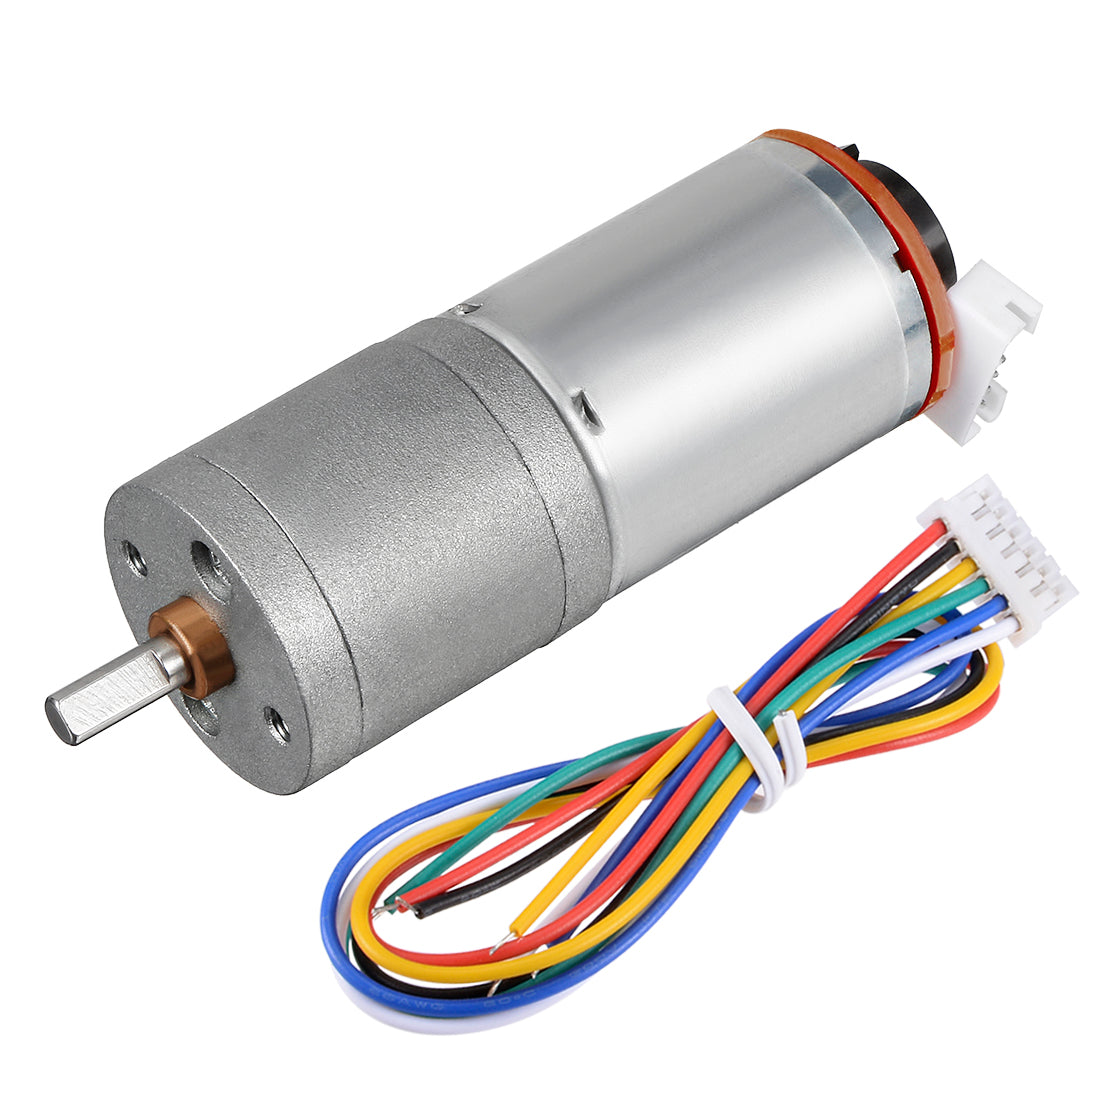 uxcell Uxcell 500:1 Gearmotor with Encoder DC 12V 8.6RPM Encoder Gear Motor 25Dx57L mm